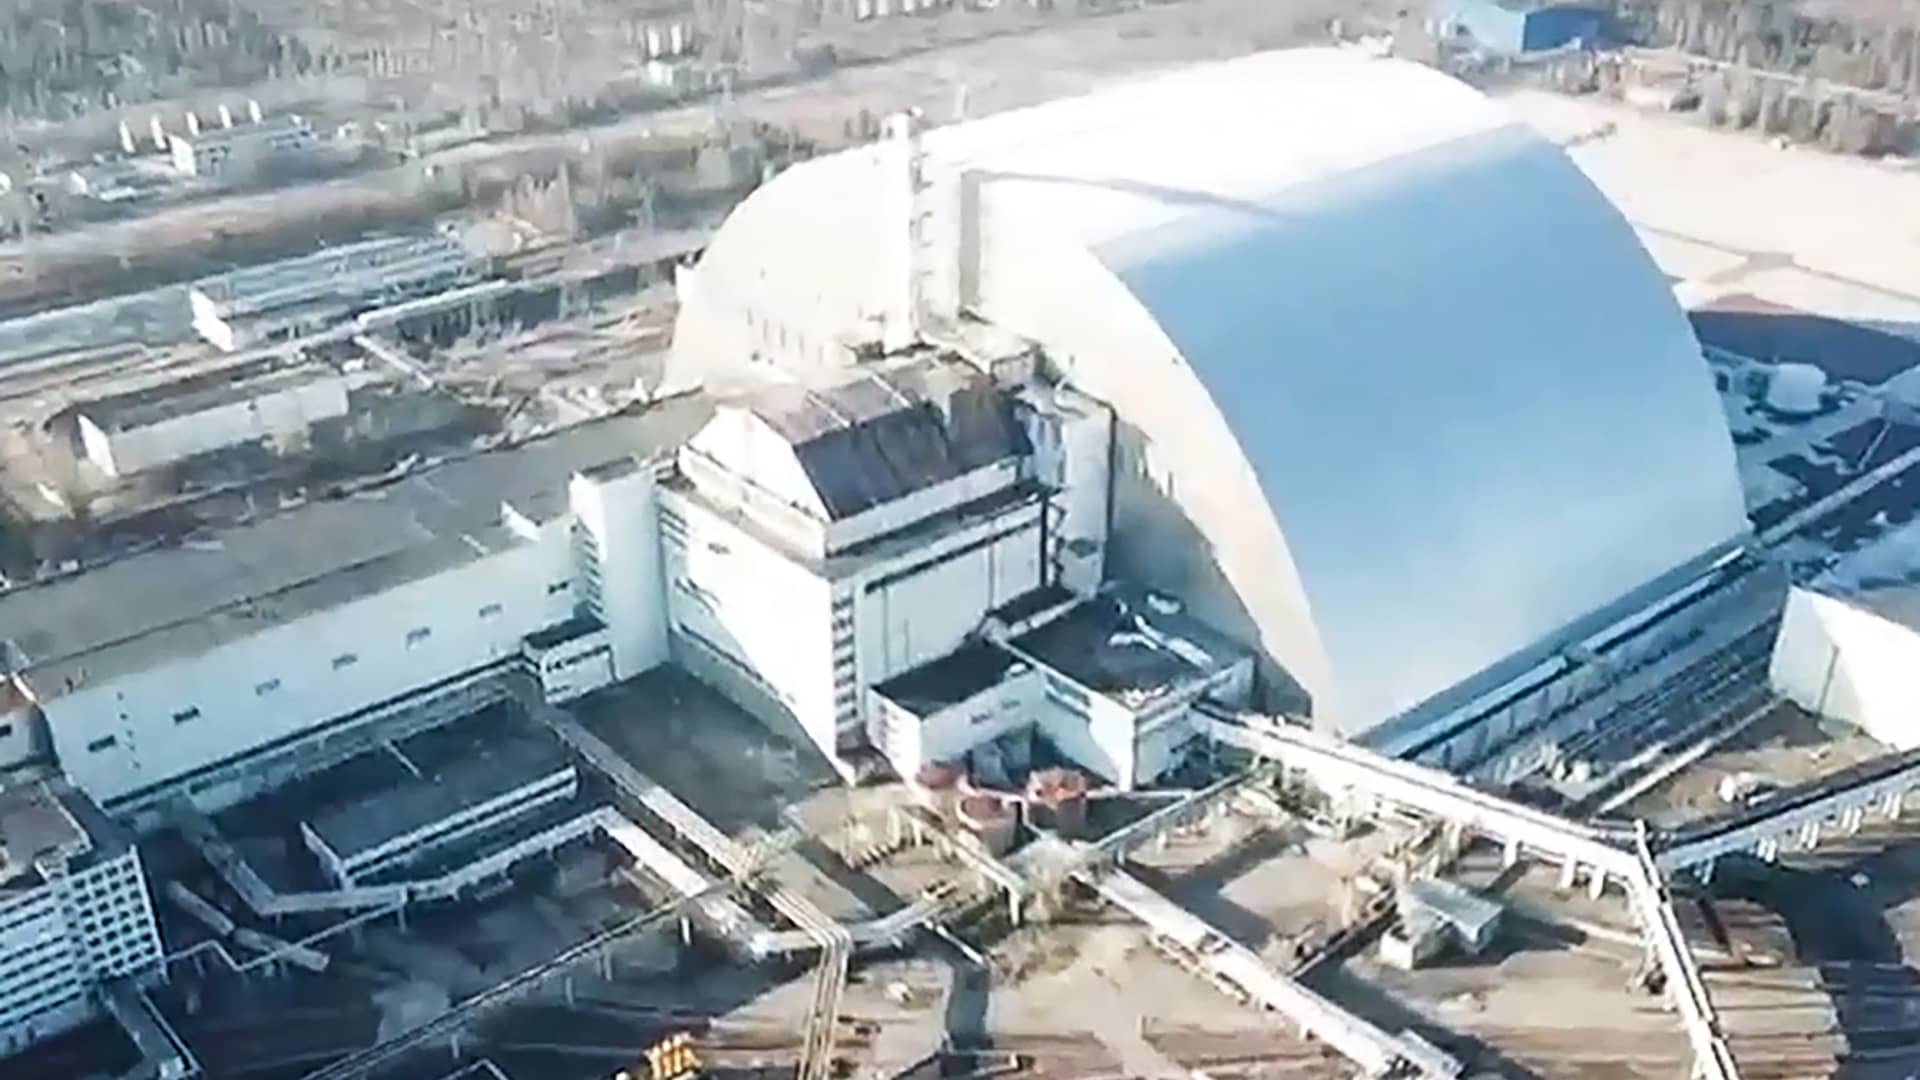 Pictured in this video screen grab is the Chernobyl Nuclear Power Plant. Russian Airborne troops and the Ukrainian National Guard are providing security at the nuclear power plant.